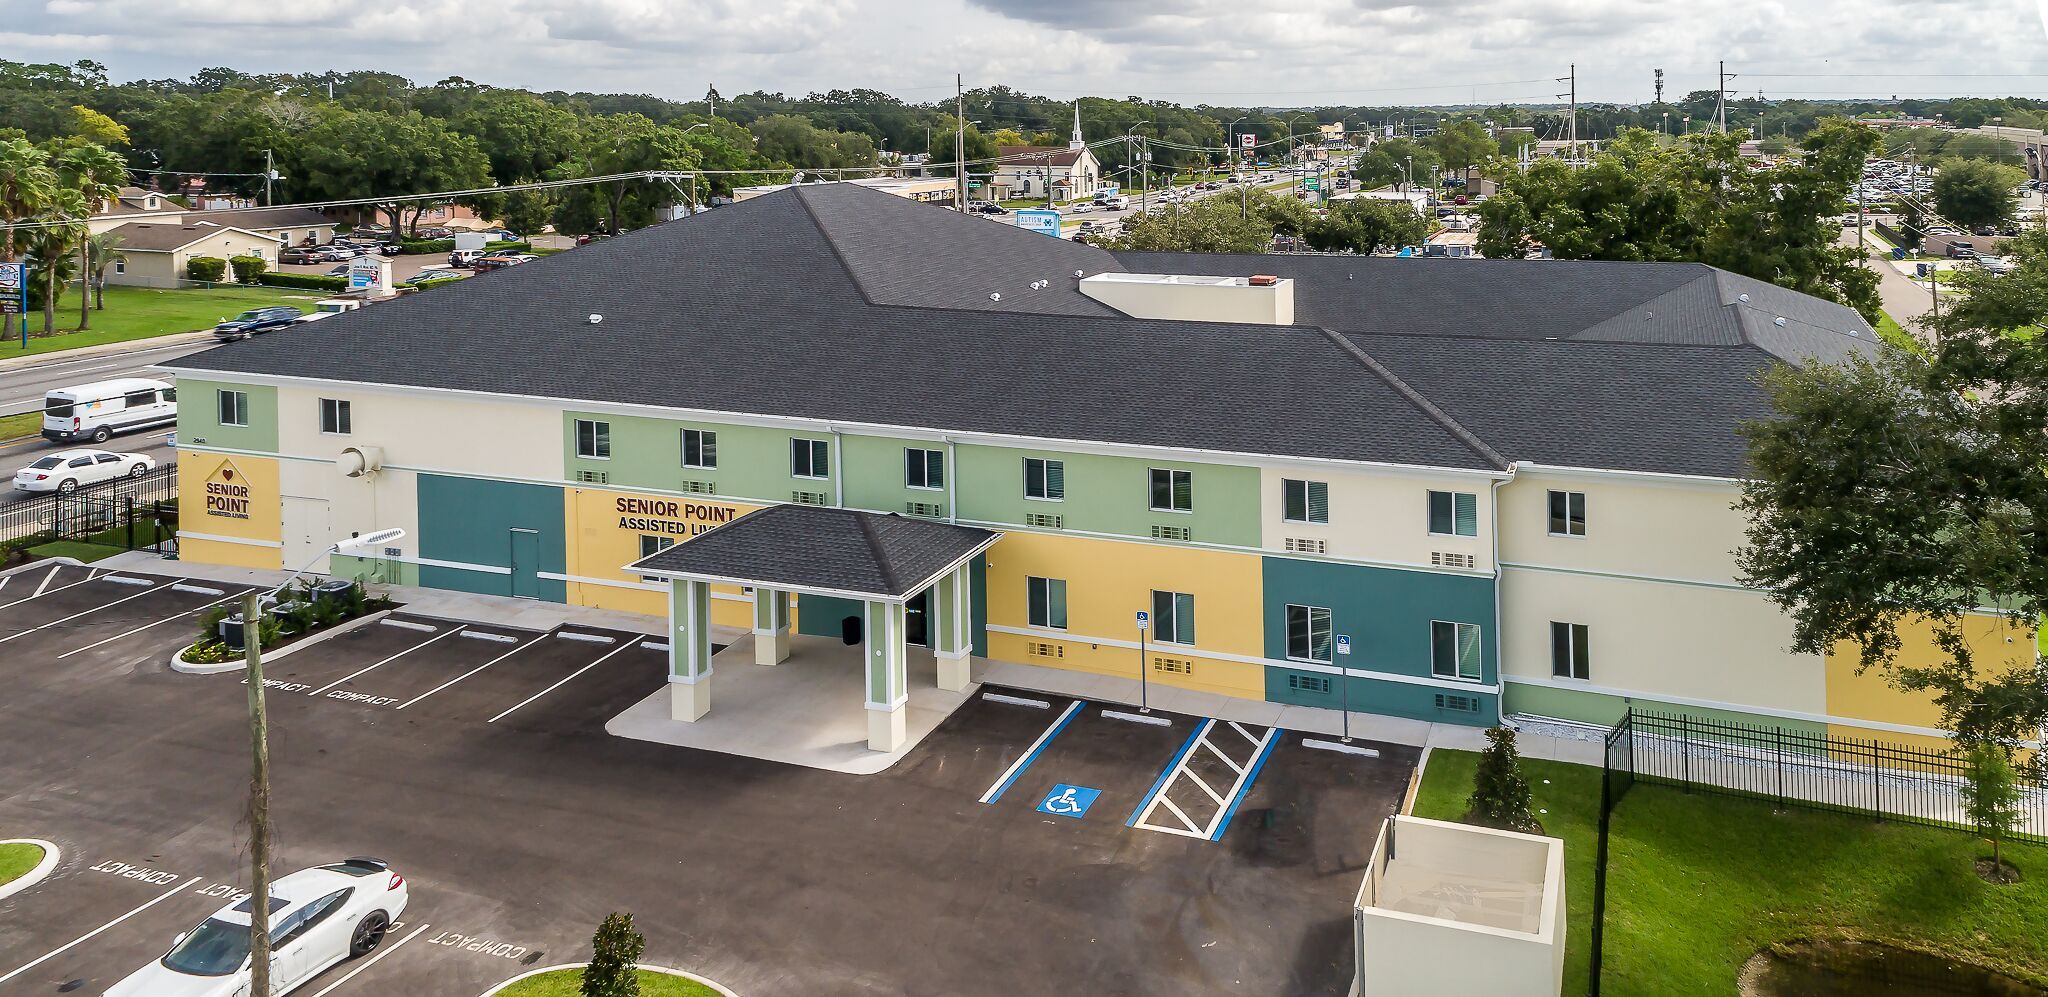 Aerial view of Senior Point Assisted Living Facility with outdoor housing, vehicles, and architecture.